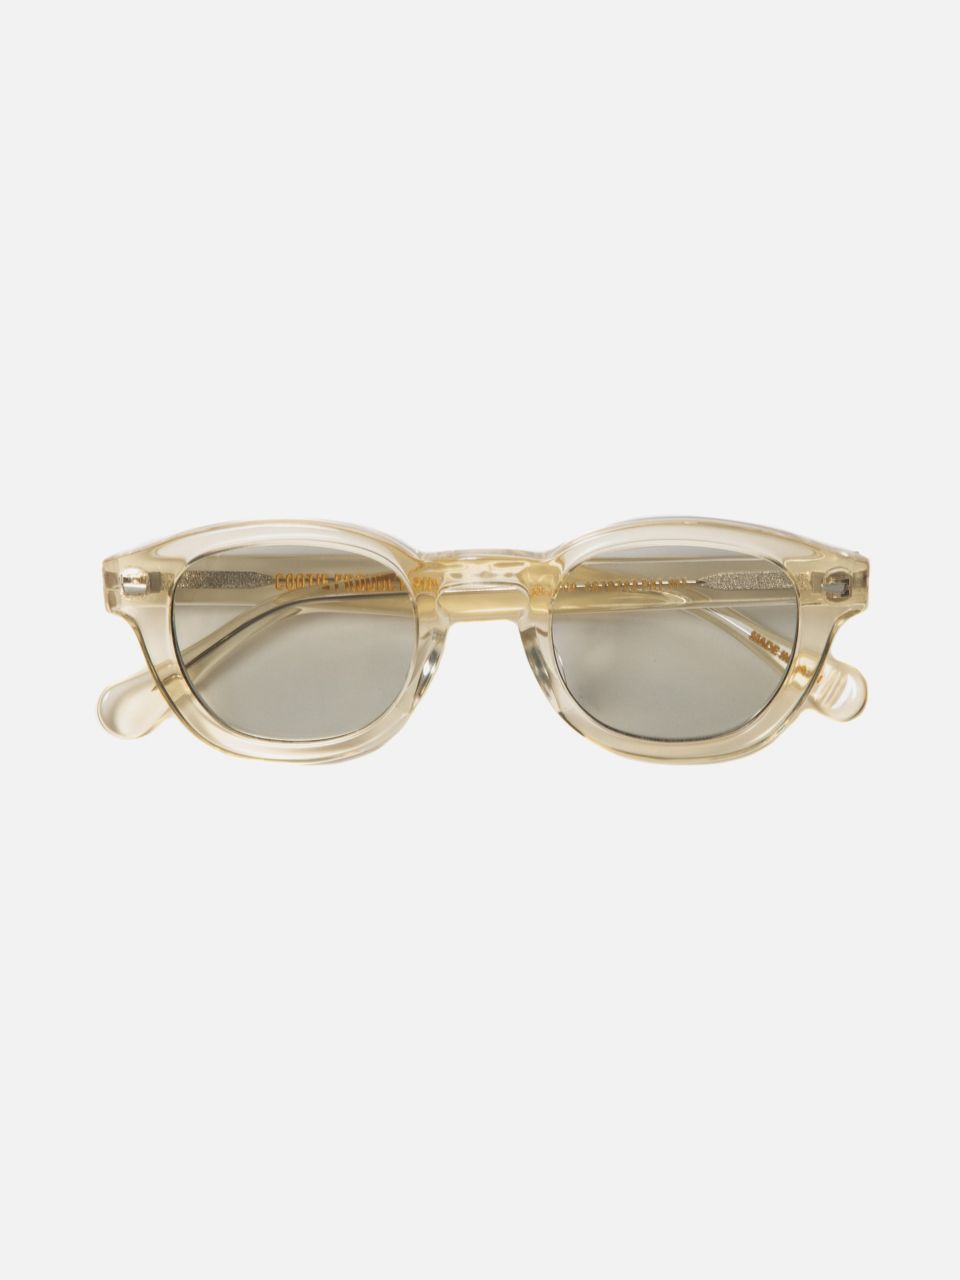 W130mmH45mmCOOTIE Chingon Glasses Light Brown